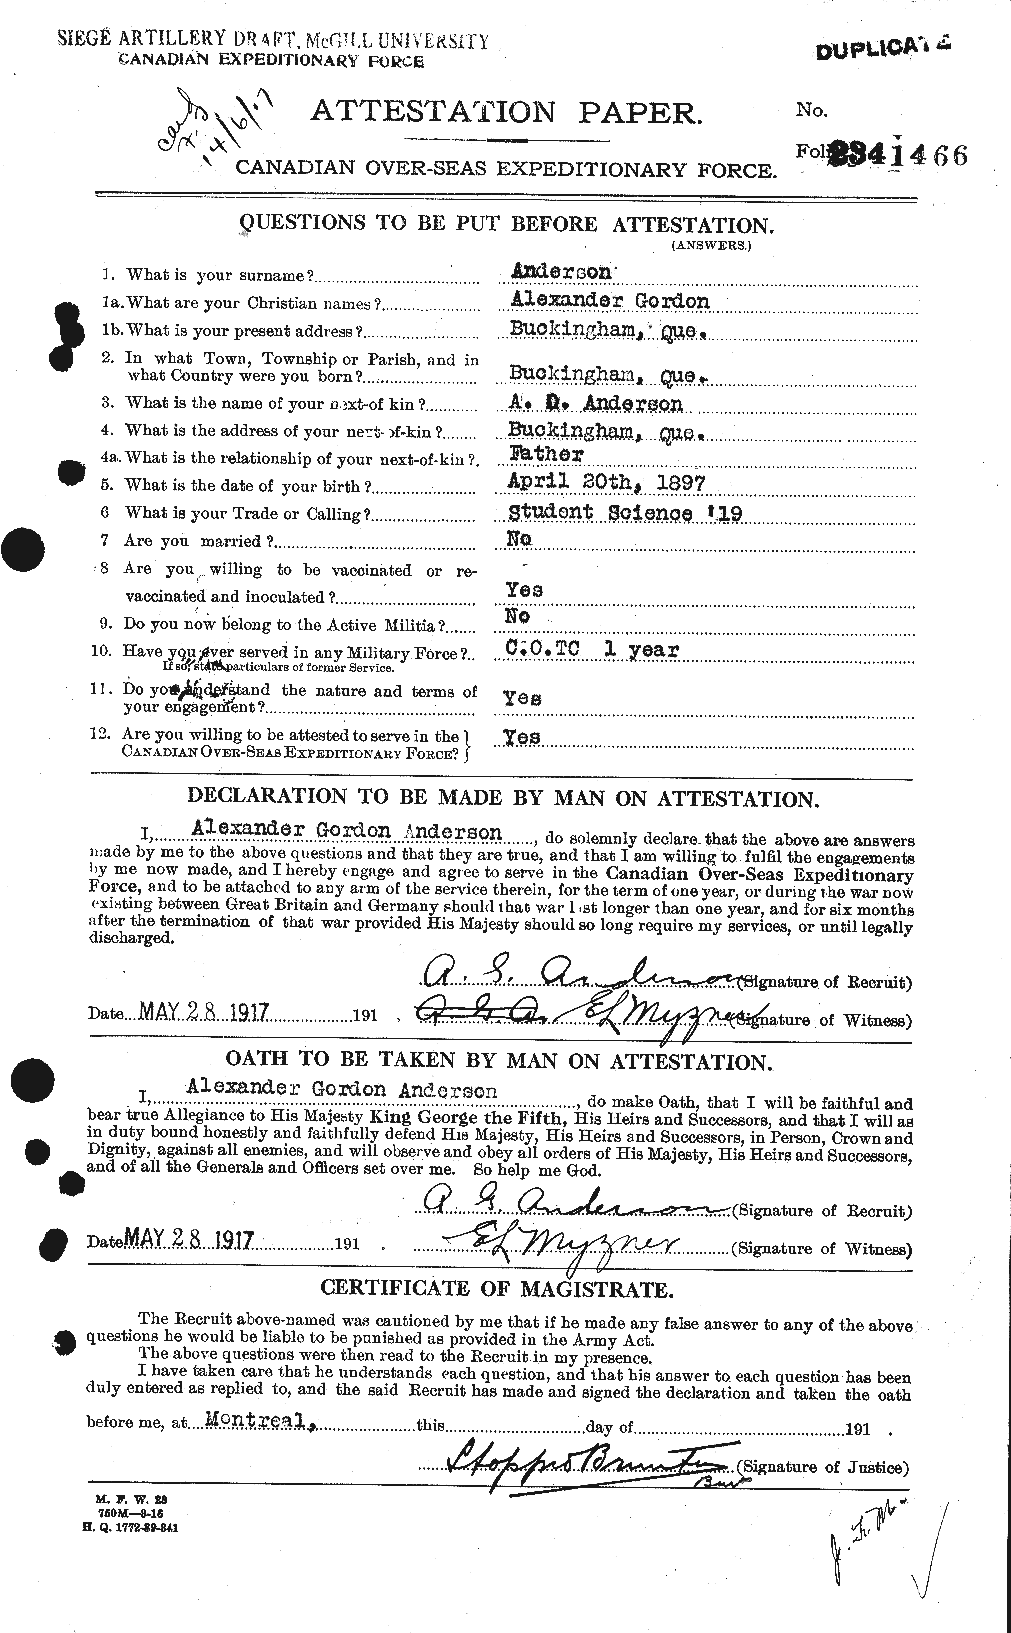 Personnel Records of the First World War - CEF 209489a